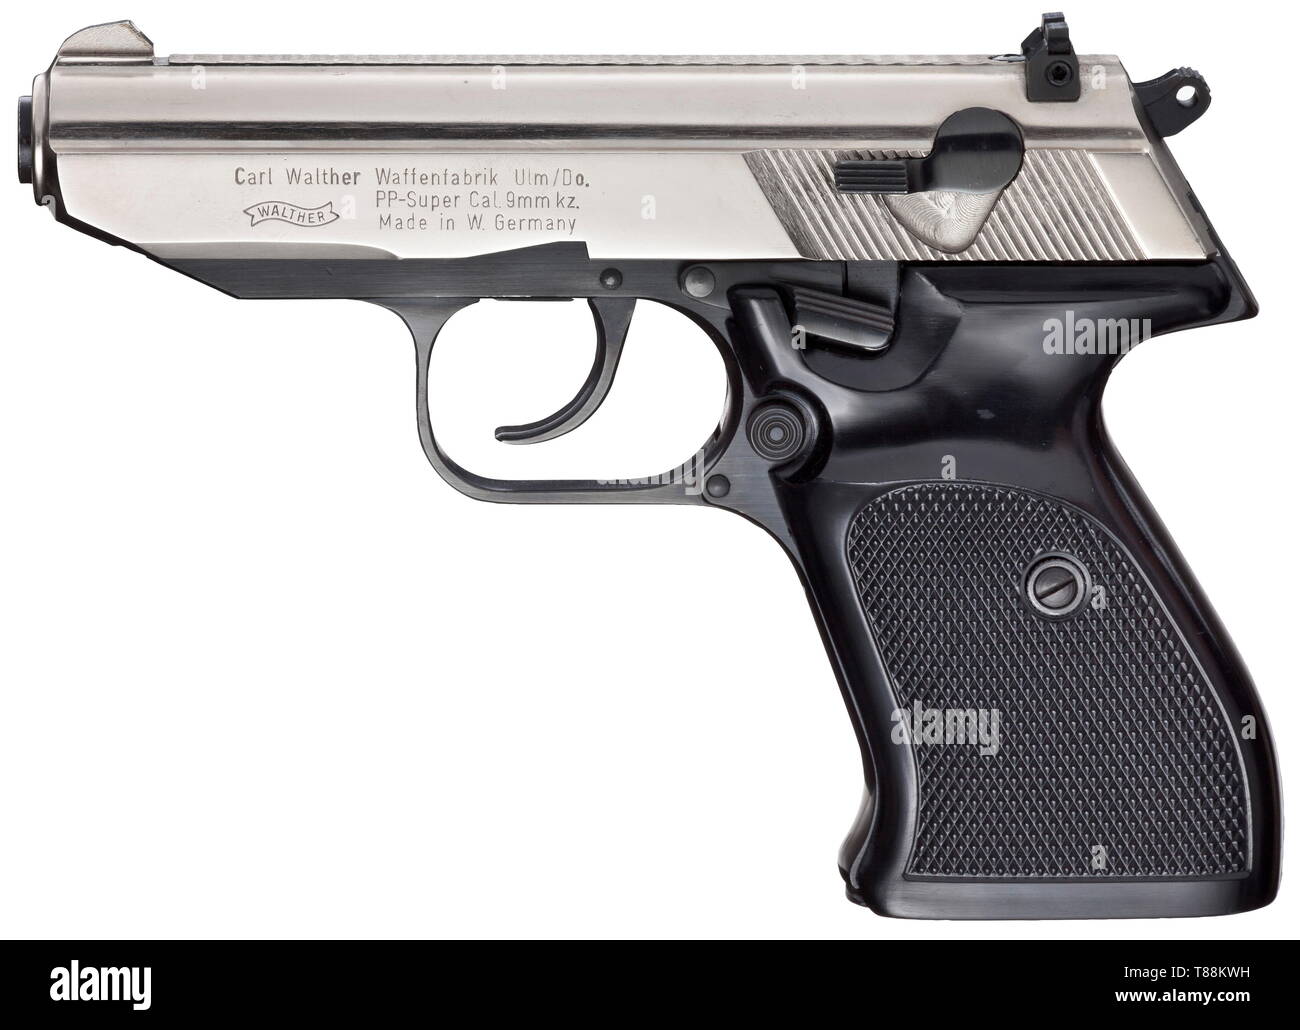 A Walther PP Super, special model in cal. 9 mm short No. 100355. Matching  numbers. Bright bore. Proof-marked 1978. Standard inscription. Slide highly  polished, nickel-plated. Grip frame blued. Black plastic grip panels.